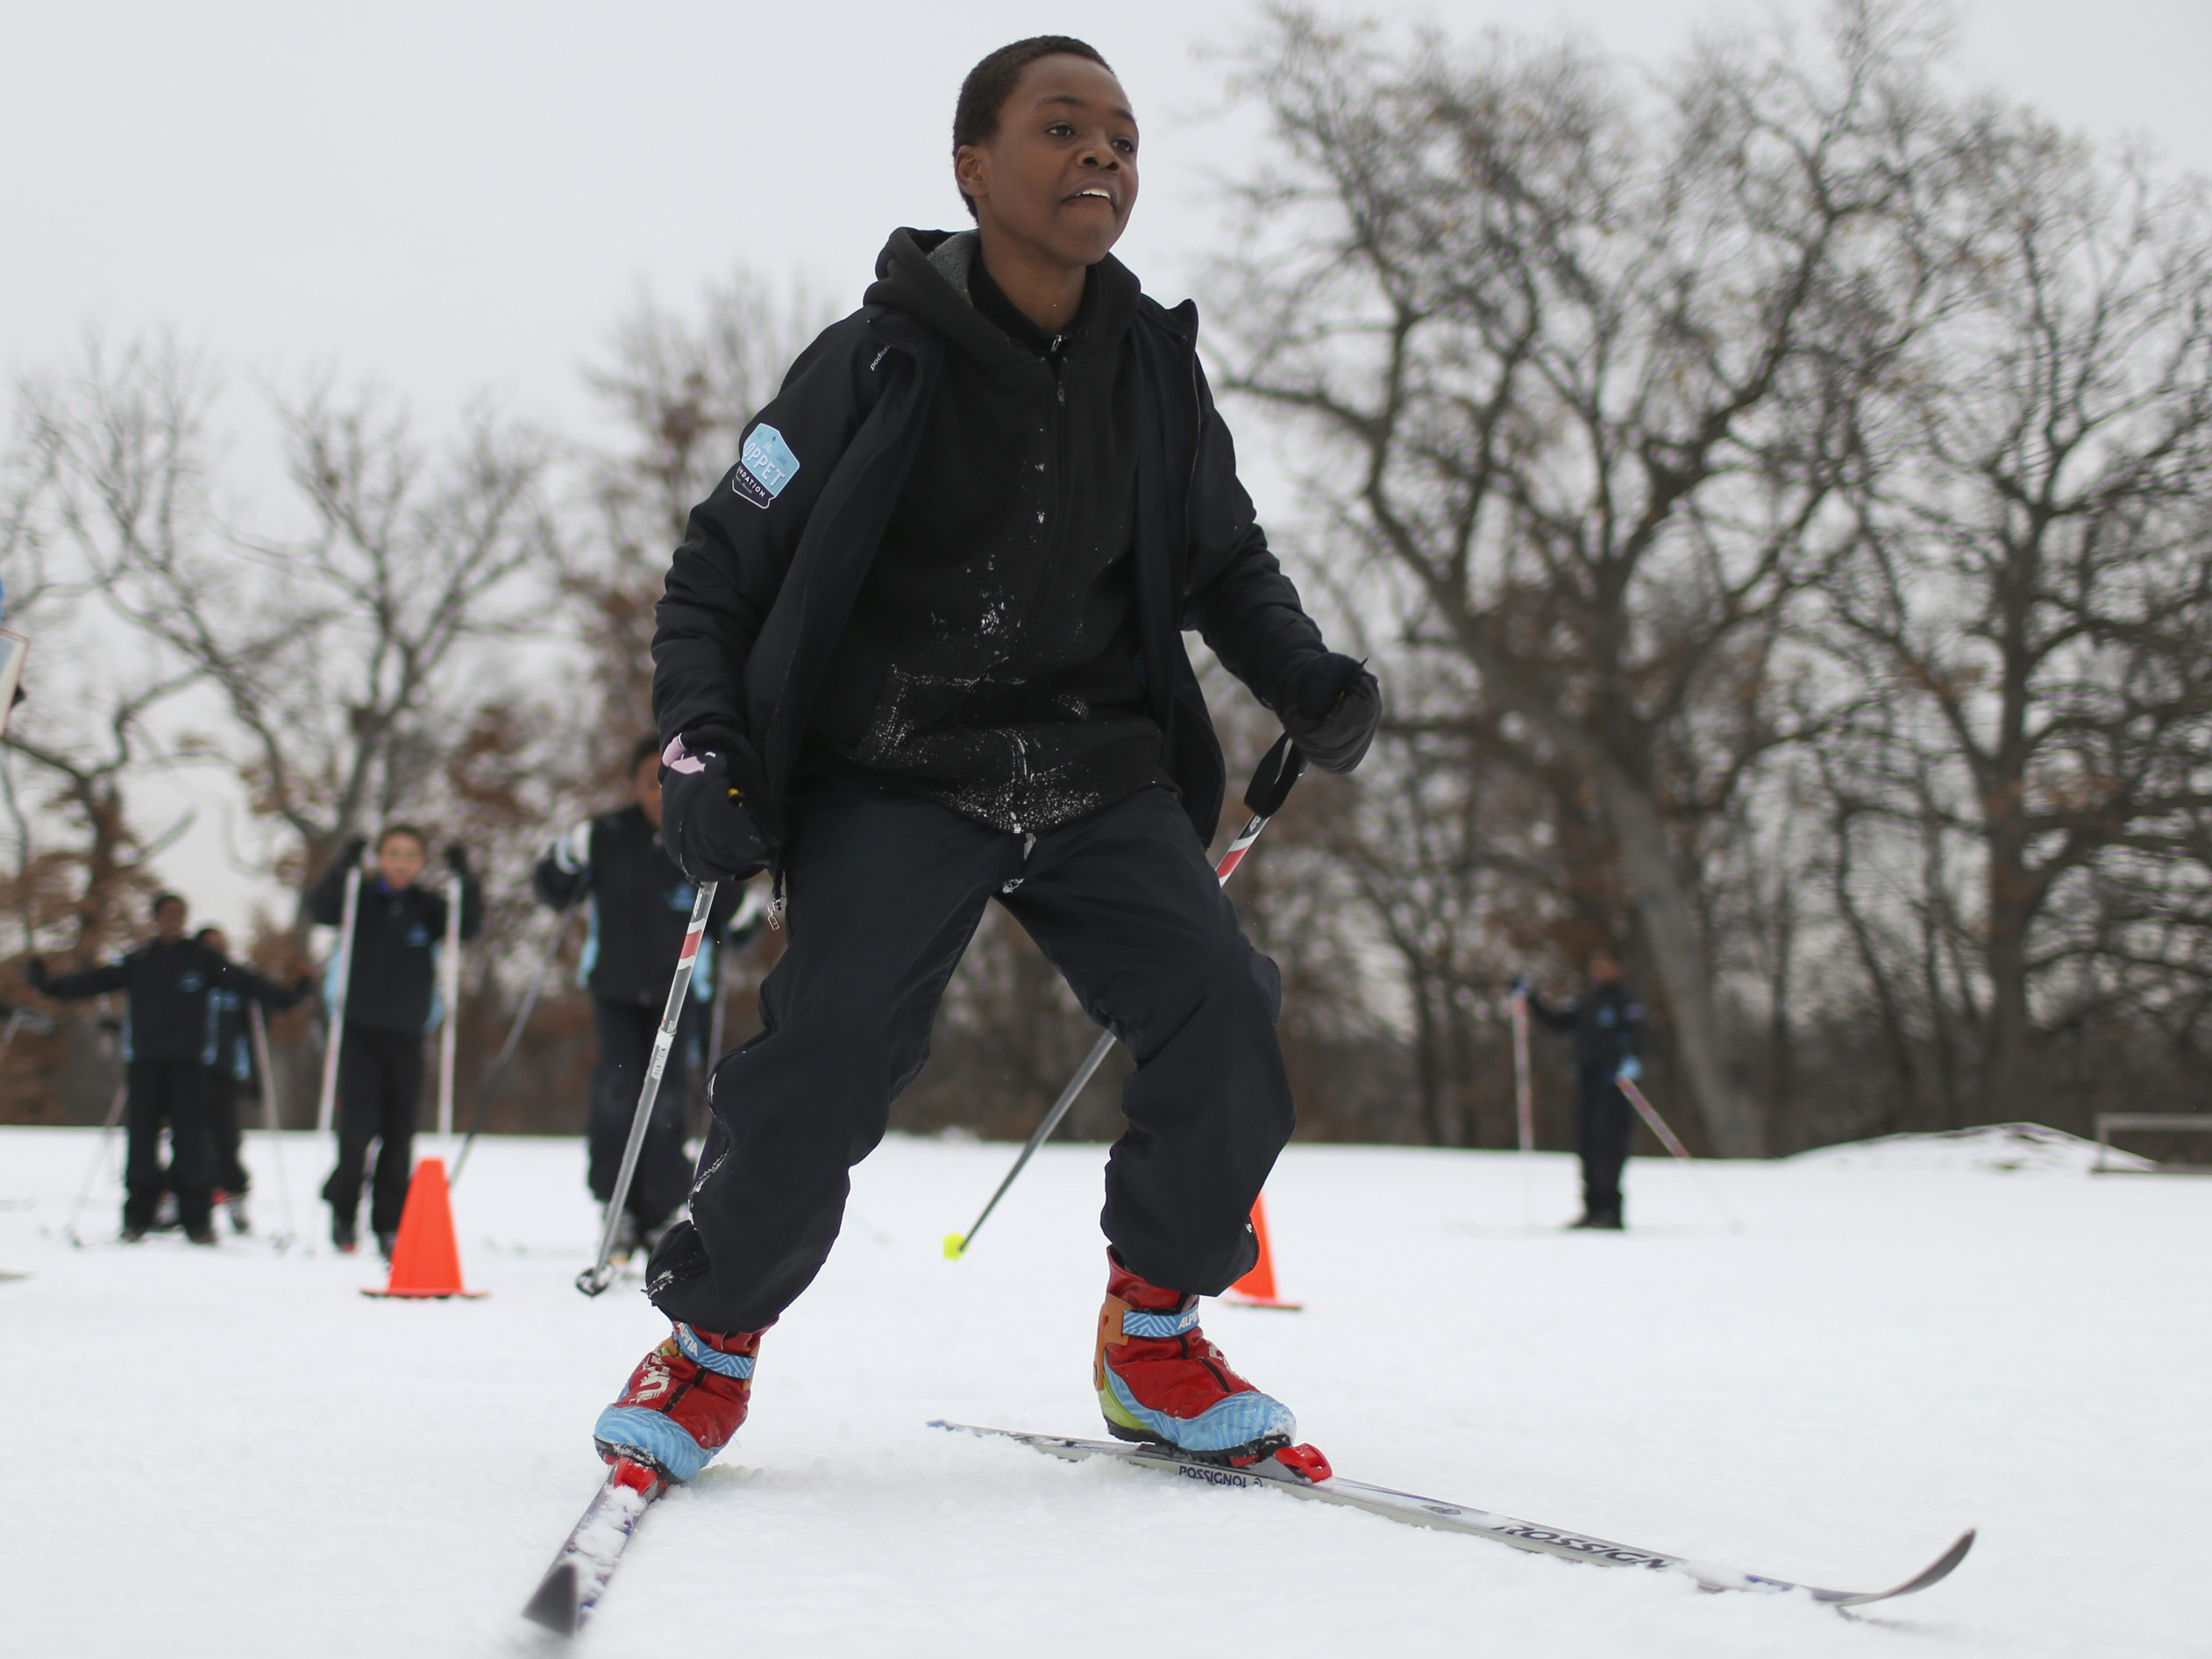 Child at cross-country skiing class